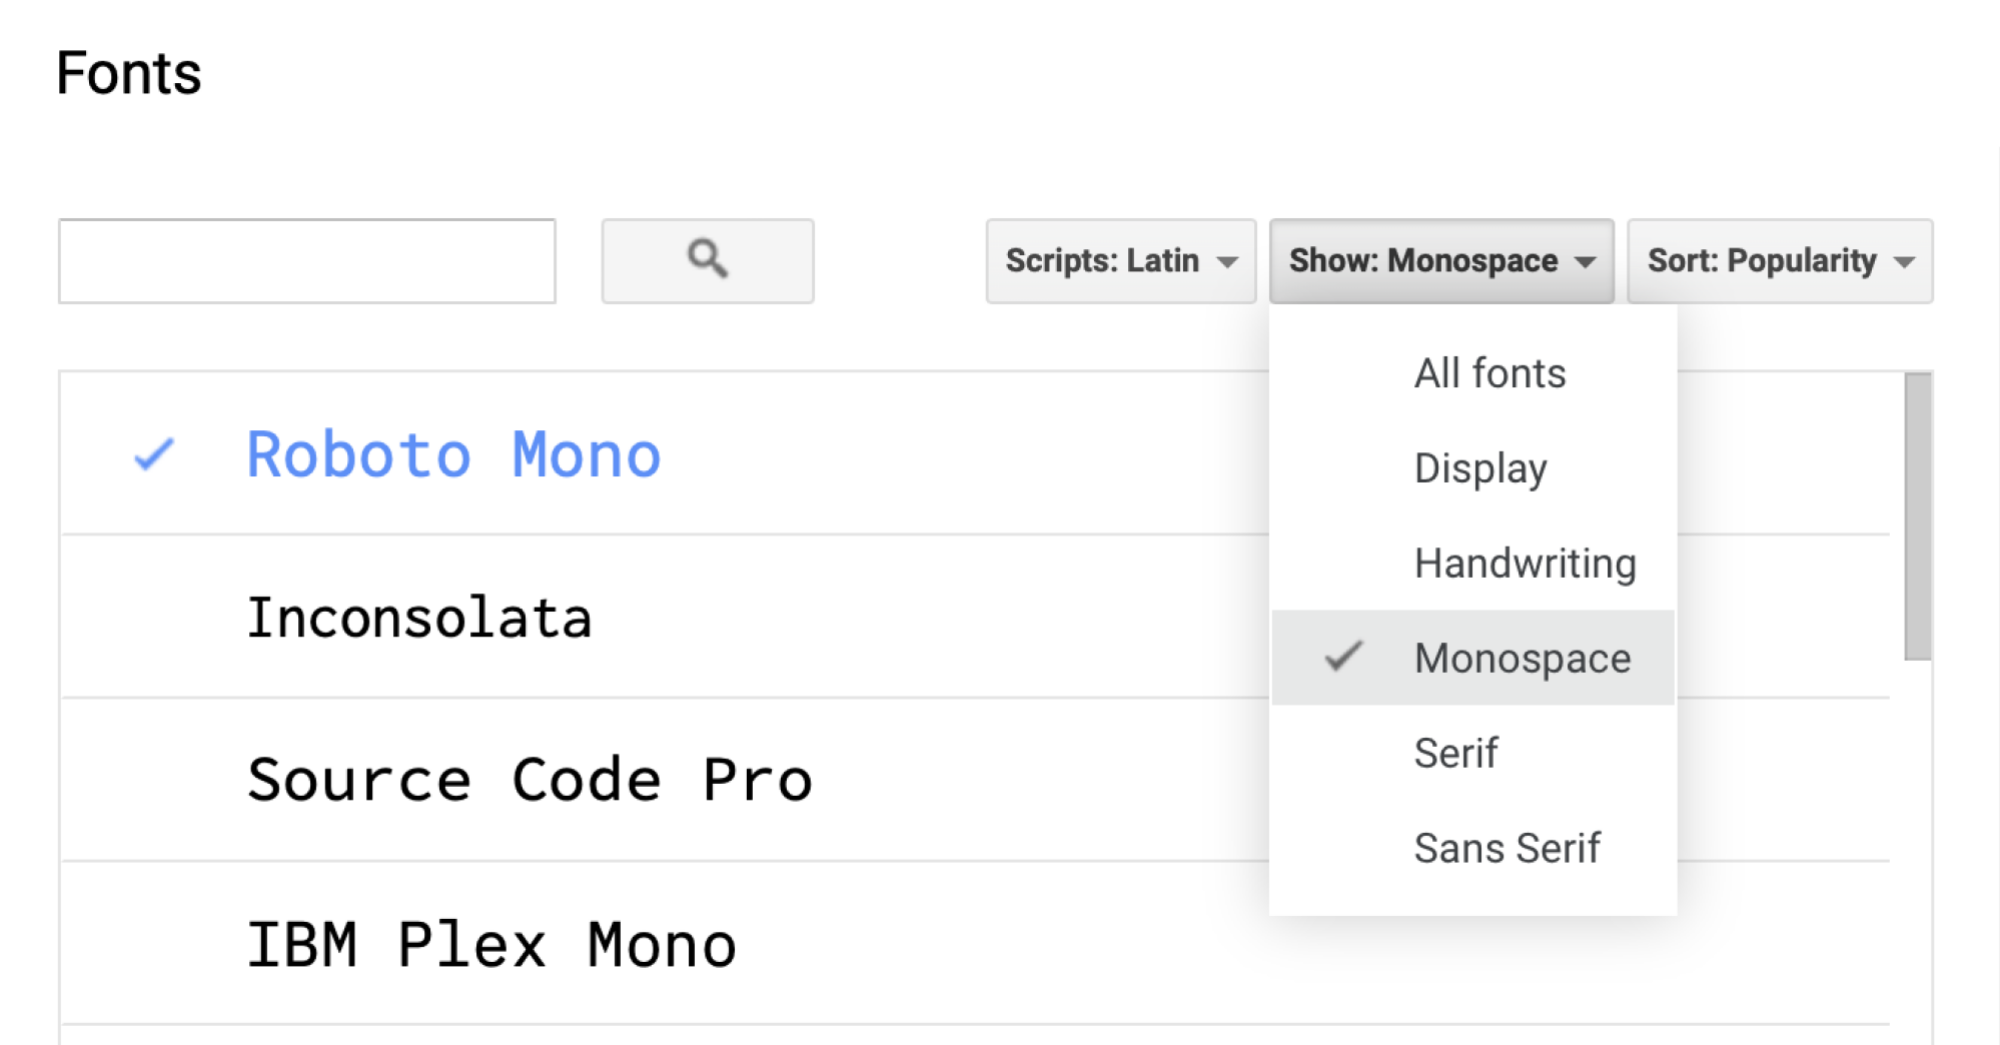 The limited filtering options for custom fonts in Google Docs